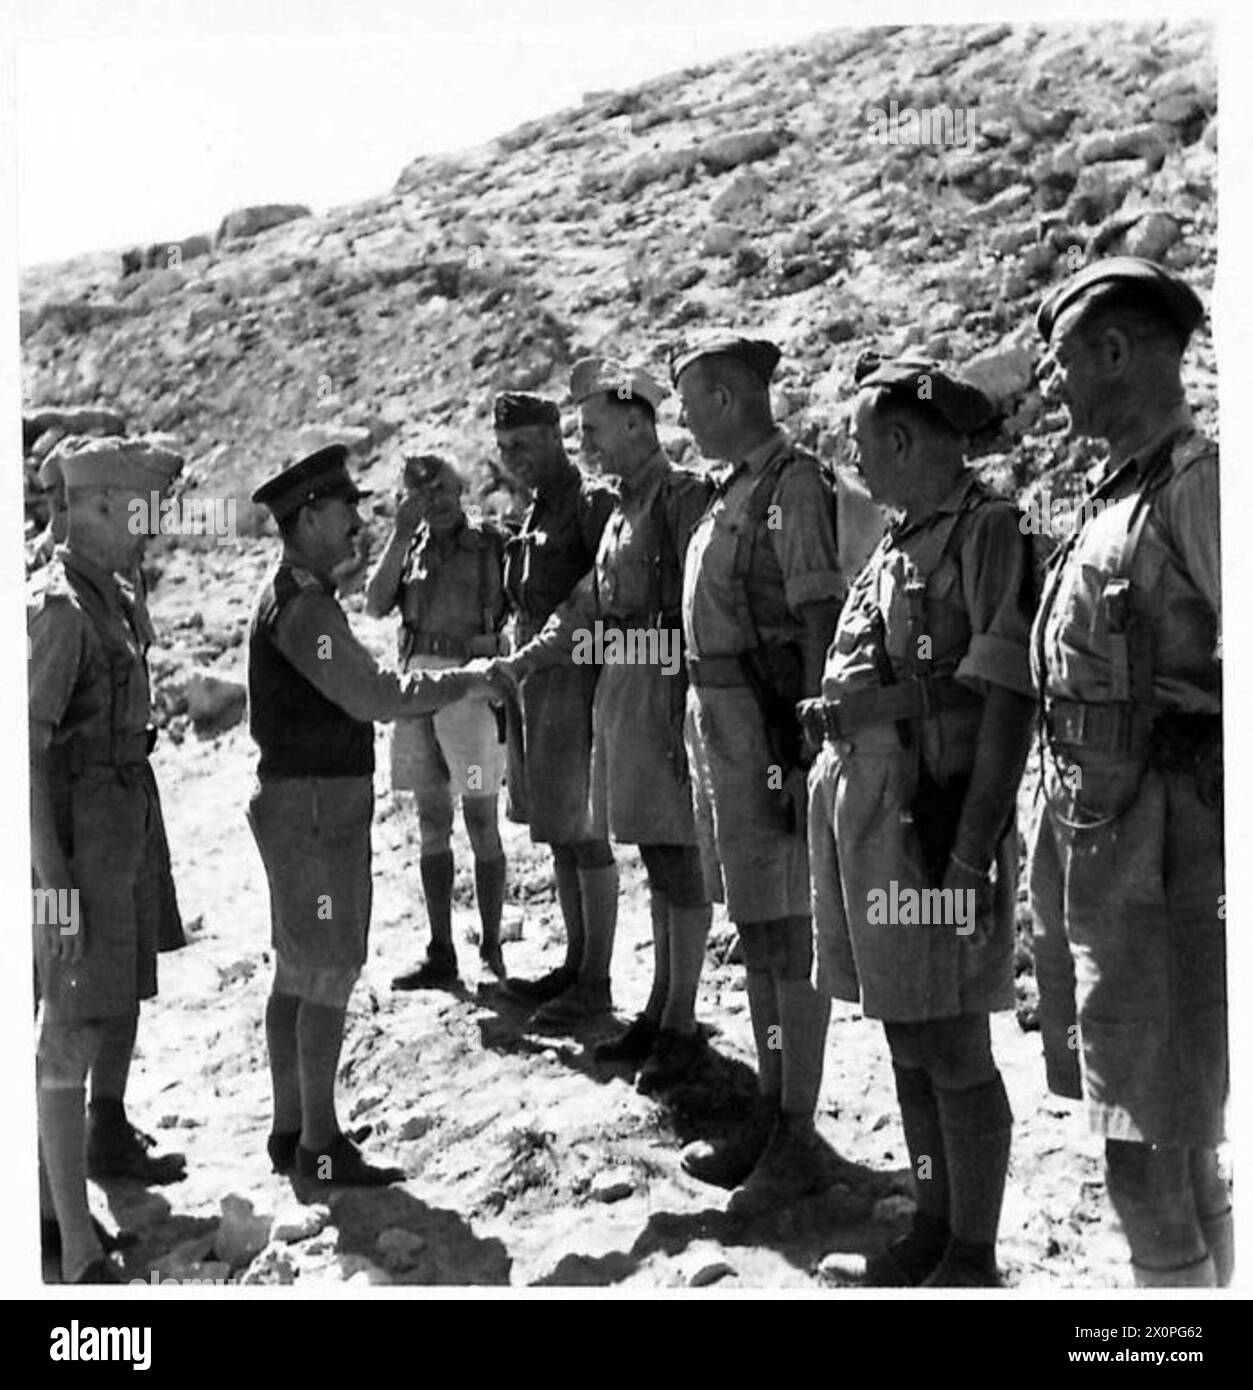 THE POLISH ARMY IN THE SIEGE OF TOBRUK, 1941 - The officers are, left to right: Major Stanisław Gliwicz, the CO of the Brigade's artillery (probably); Colonel Walenty Peszek, the Deputy Commander of the Brigade; Major Władysław Bobiński, the CO of the Carpathian Lancers Regiment (probably); Lieutenant Colonel Antoni Dołęga-Cieszkowski, the CO of the 2nd Infantry Regiment; unknown, unknown. General Leslie Morshead, the Commander of the Australian 9th Division, paying a visit to the Polish Independent Carpathian Rifles Brigade to wish them good luck, before his departure from Tobruk. Here he is Stock Photo